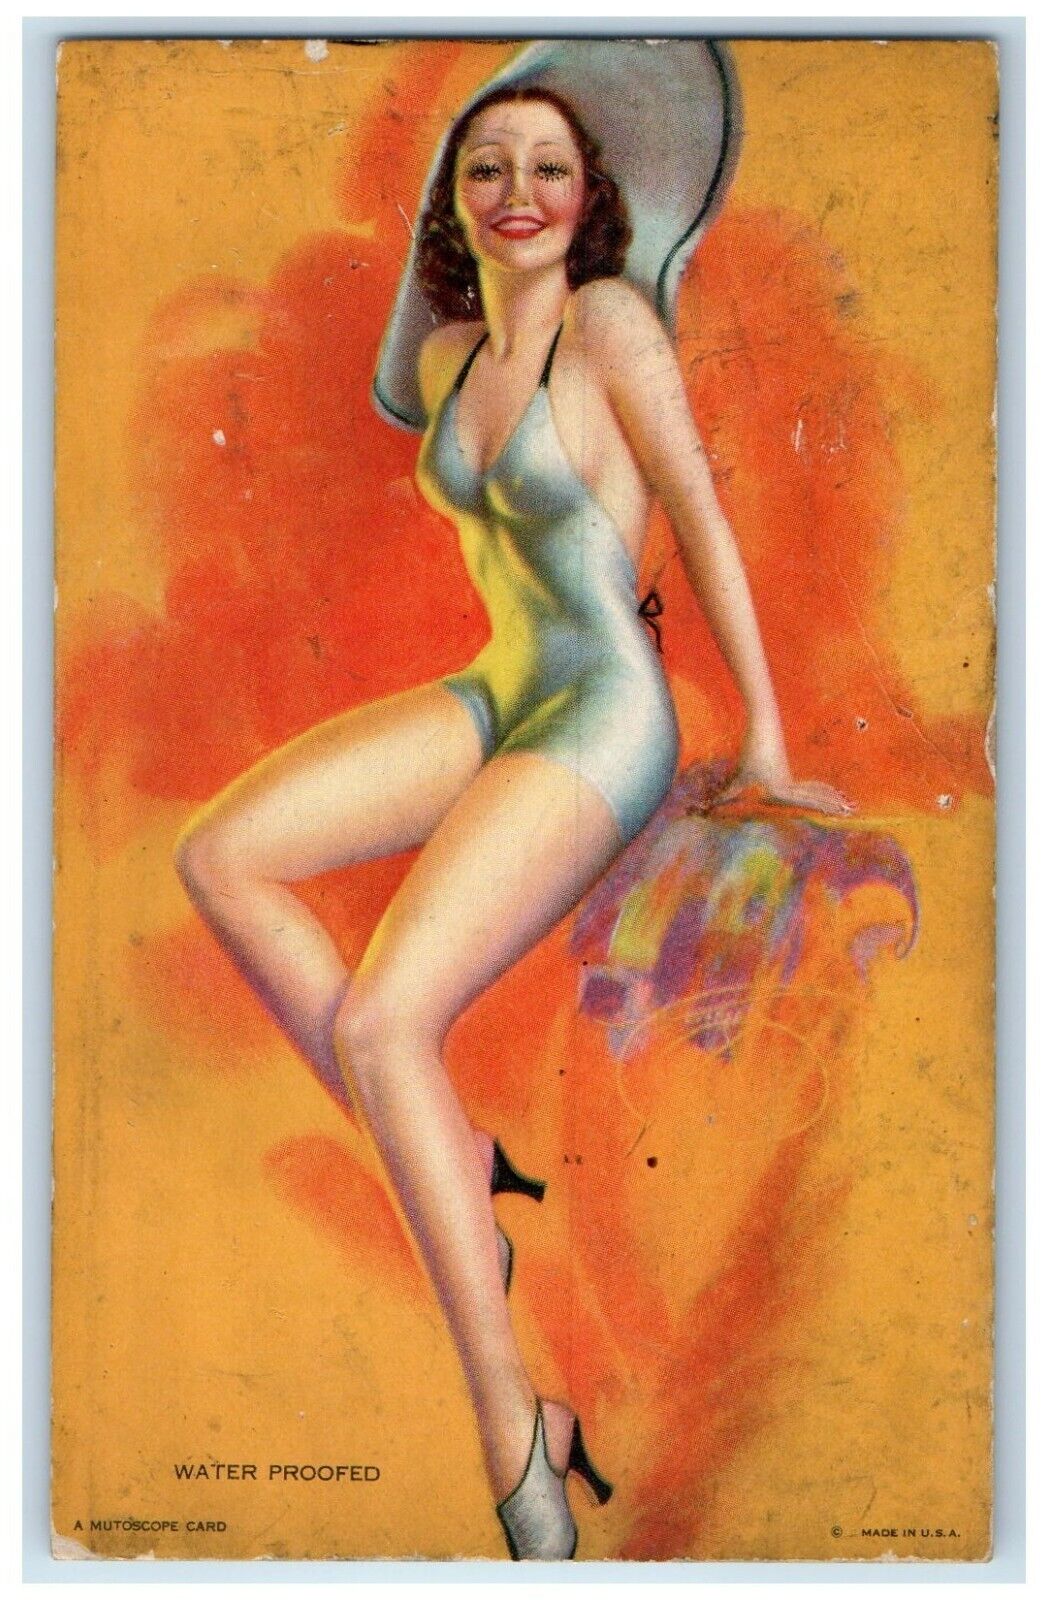 c1950's Mutoscope Glamour Girl Water Proofed Exhibit Arcade Card